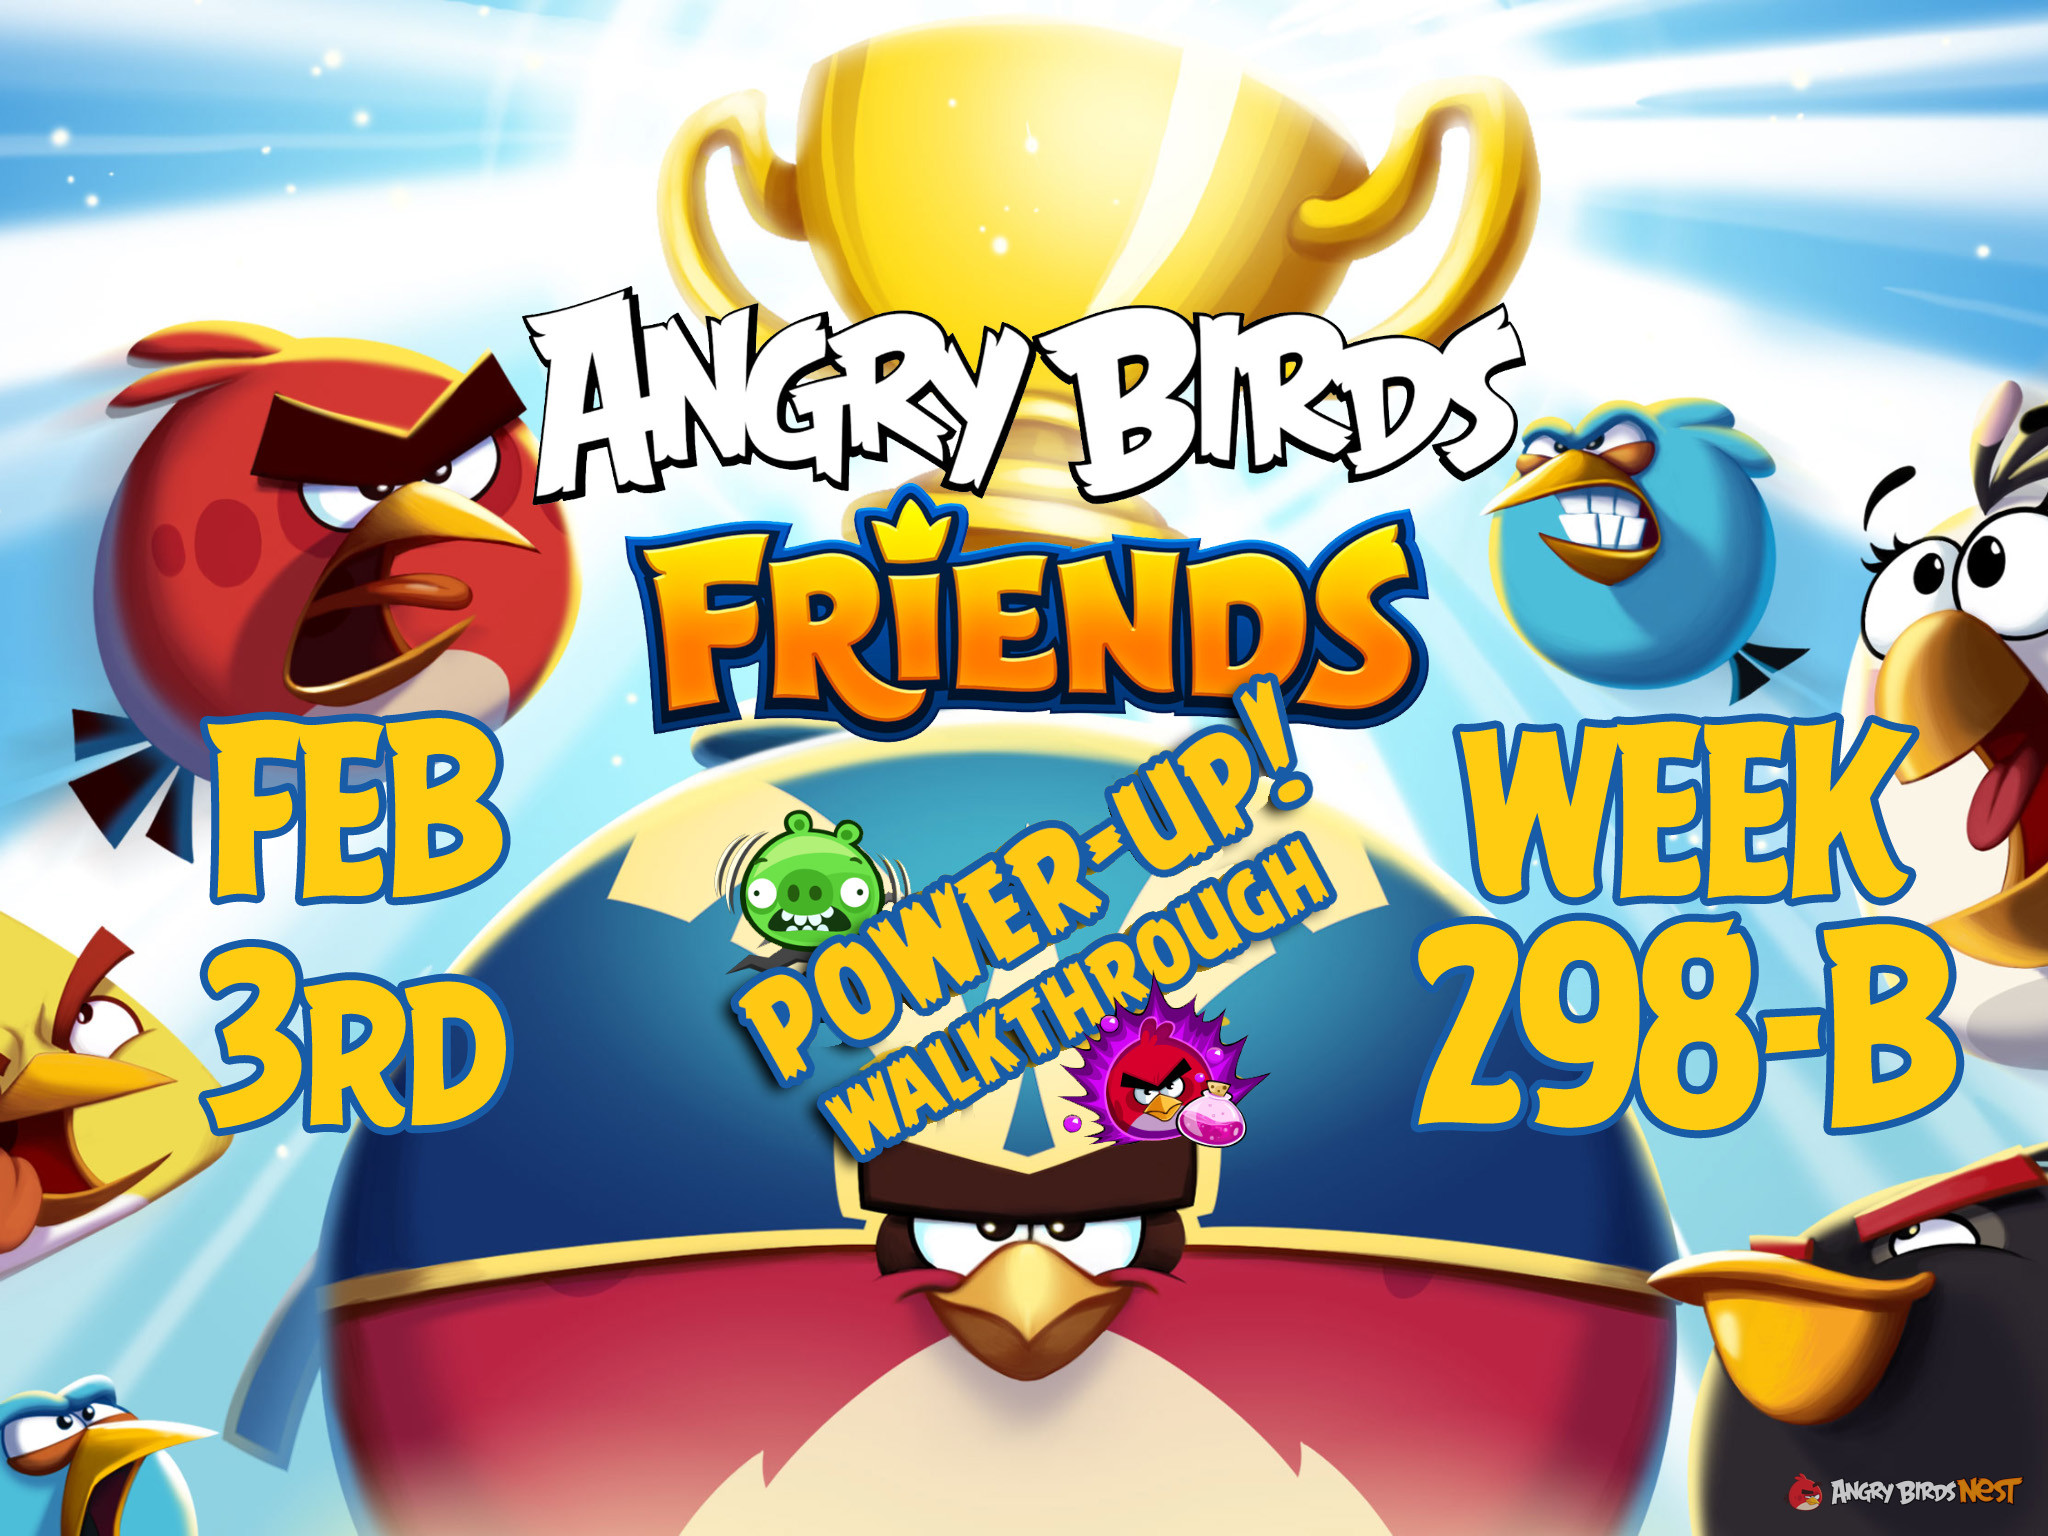 Angry Birds Friends Tournament Week 298-B Feature Image PU